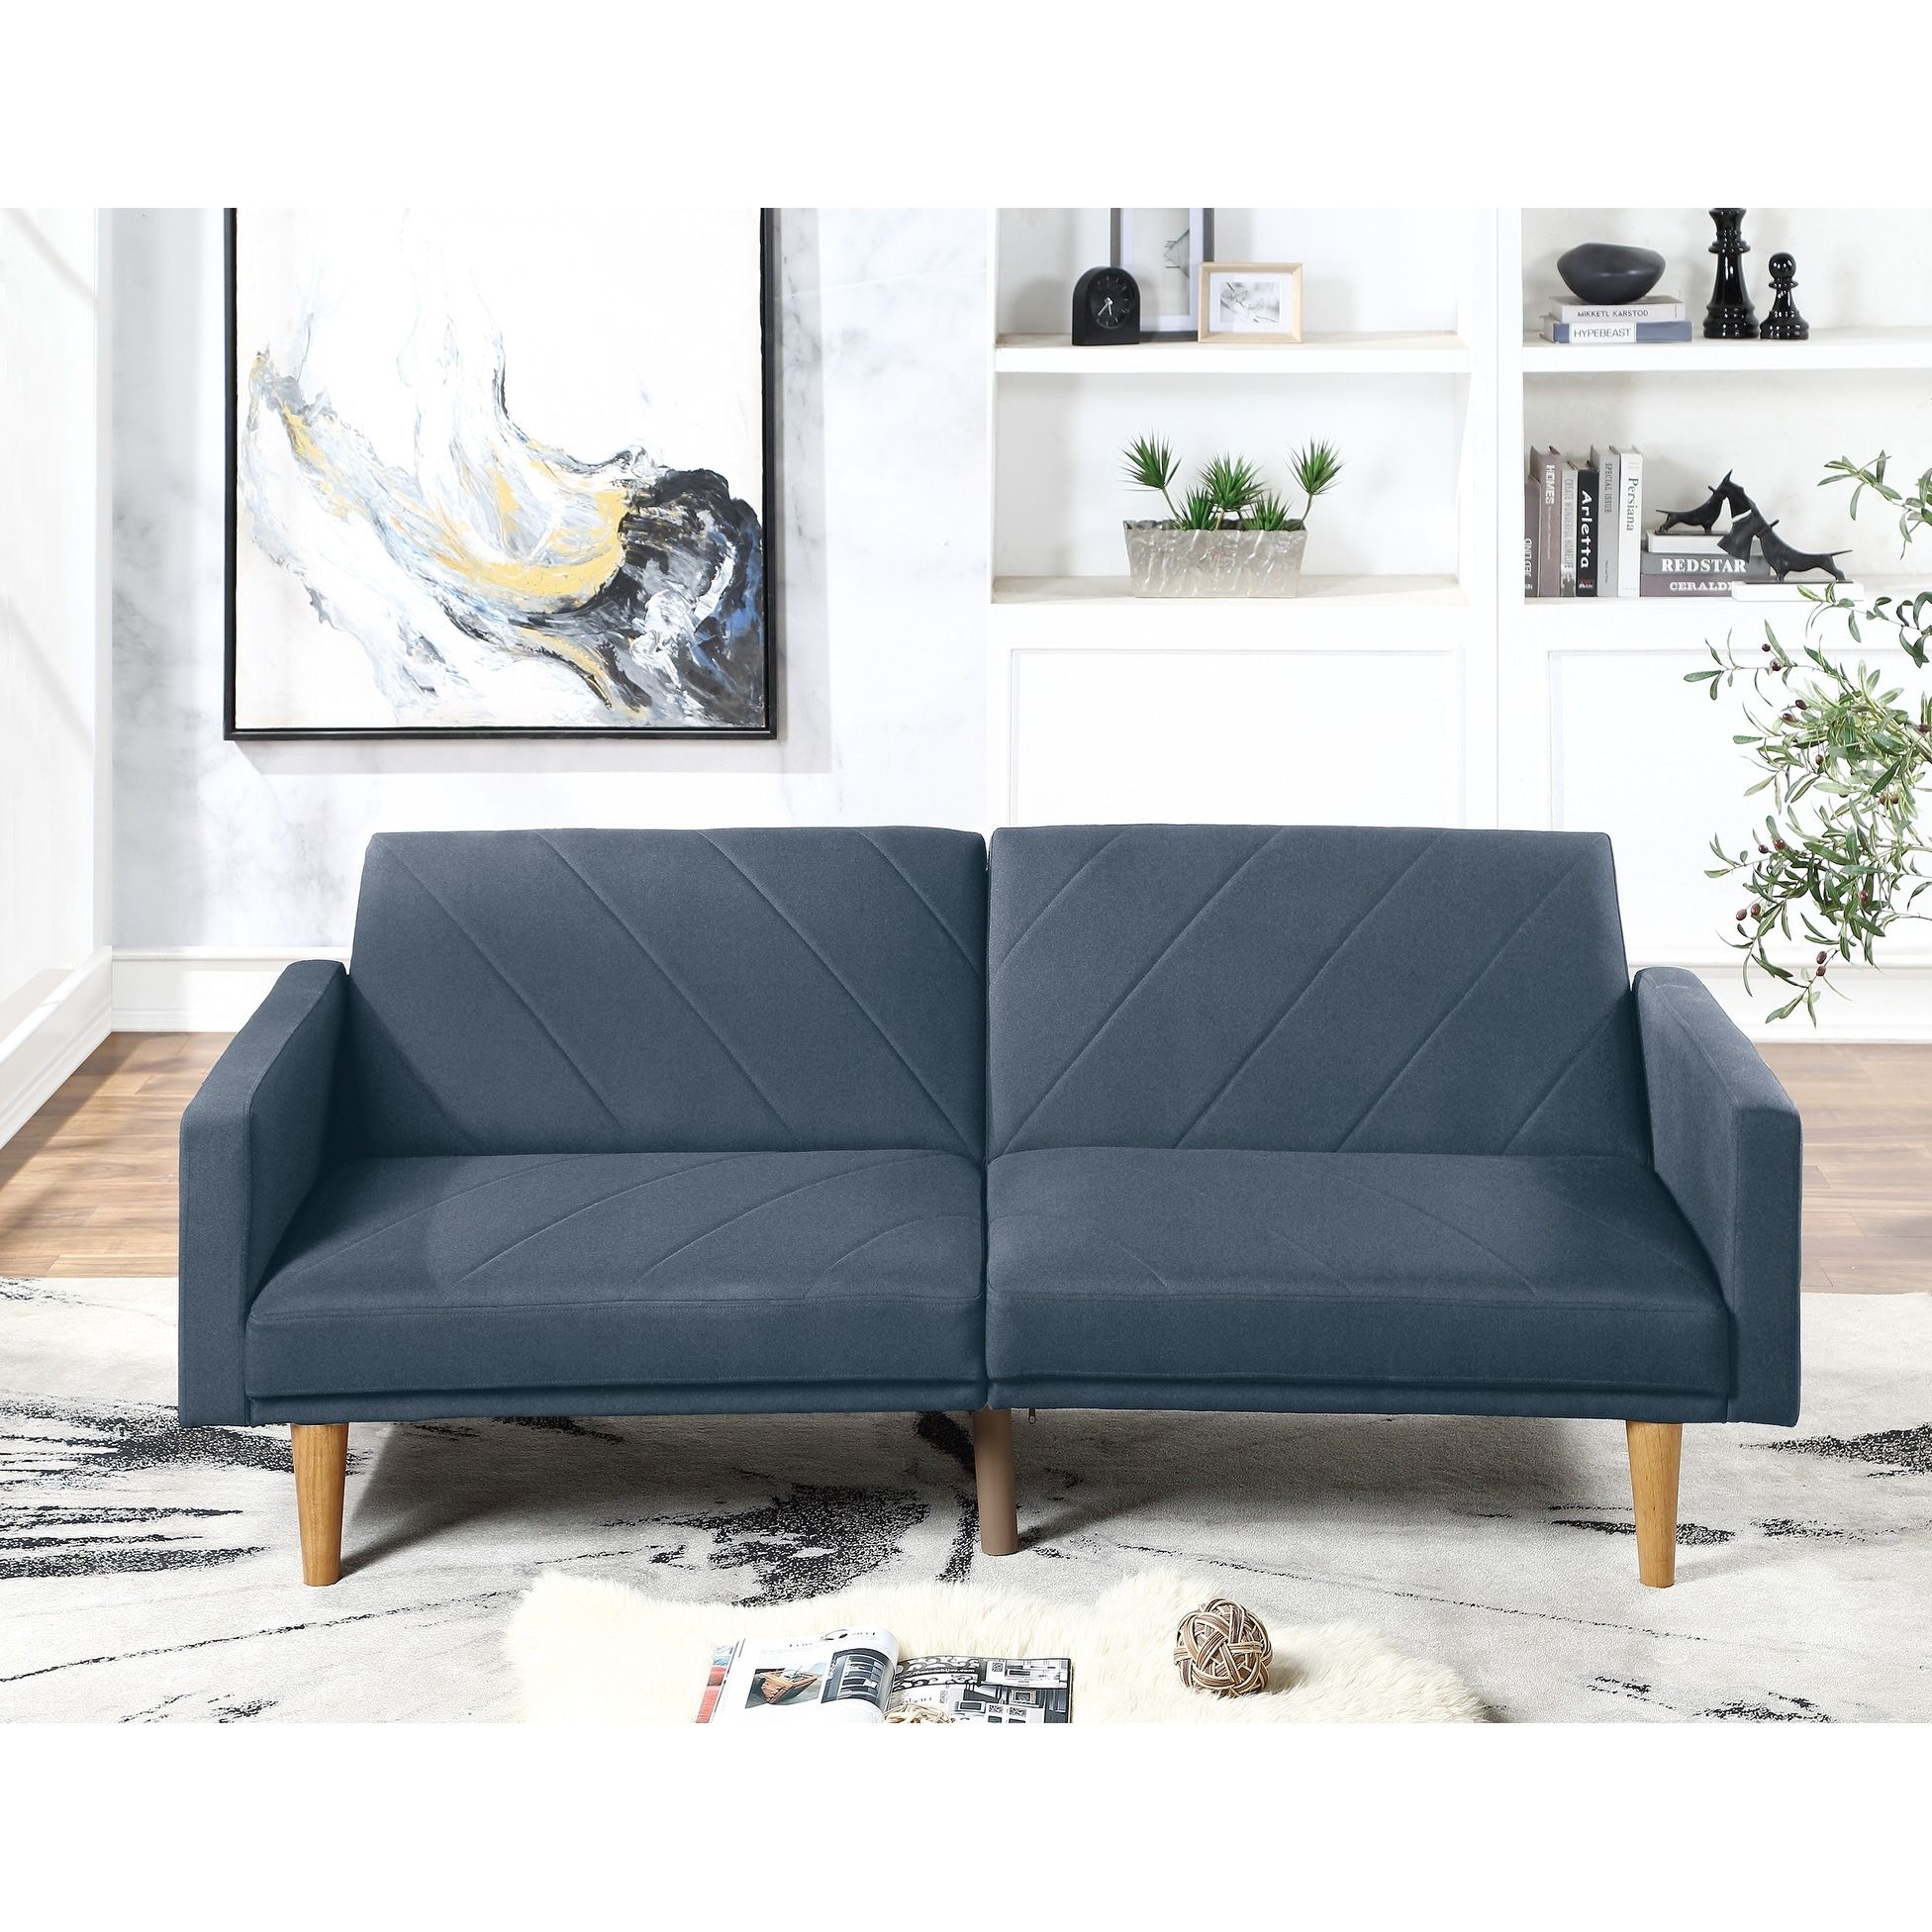 Modern Electric Look 1pc Convertible Sofa Couch Navy Color Linen Like  Fabric Cushion Wooden Legs Living Room – Bed Bath & Beyond – 35204646 Throughout Navy Sleeper Sofa Couches (Photo 7 of 15)